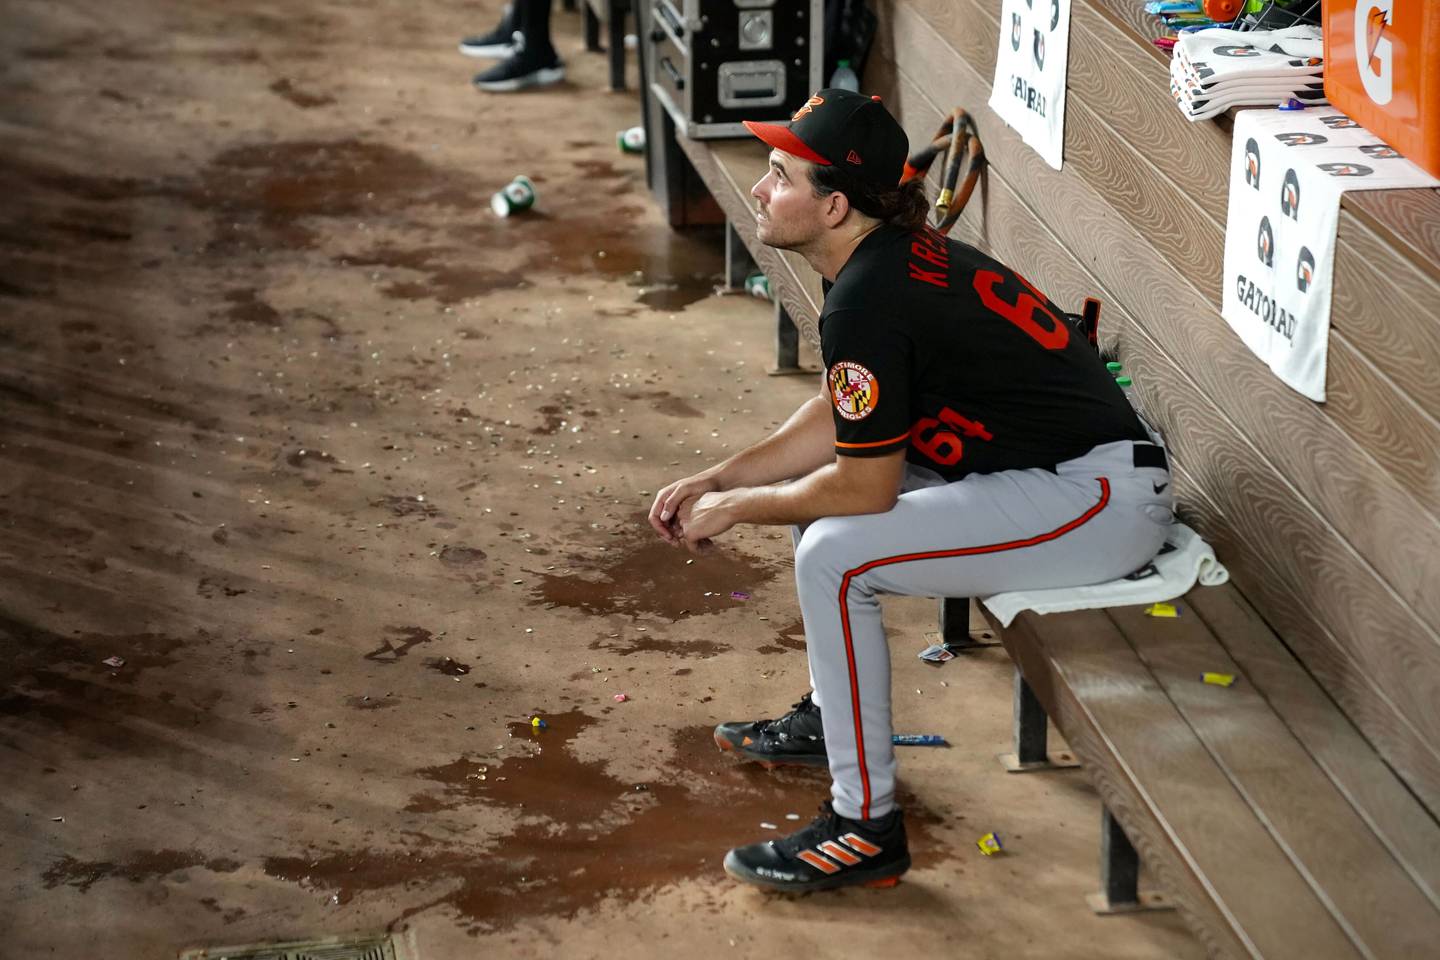 Orioles starter Dean Kremer looks on after being pulled from Game 3 against the Texas Rangers with two outs in the second inning. He gave up six earned runs.